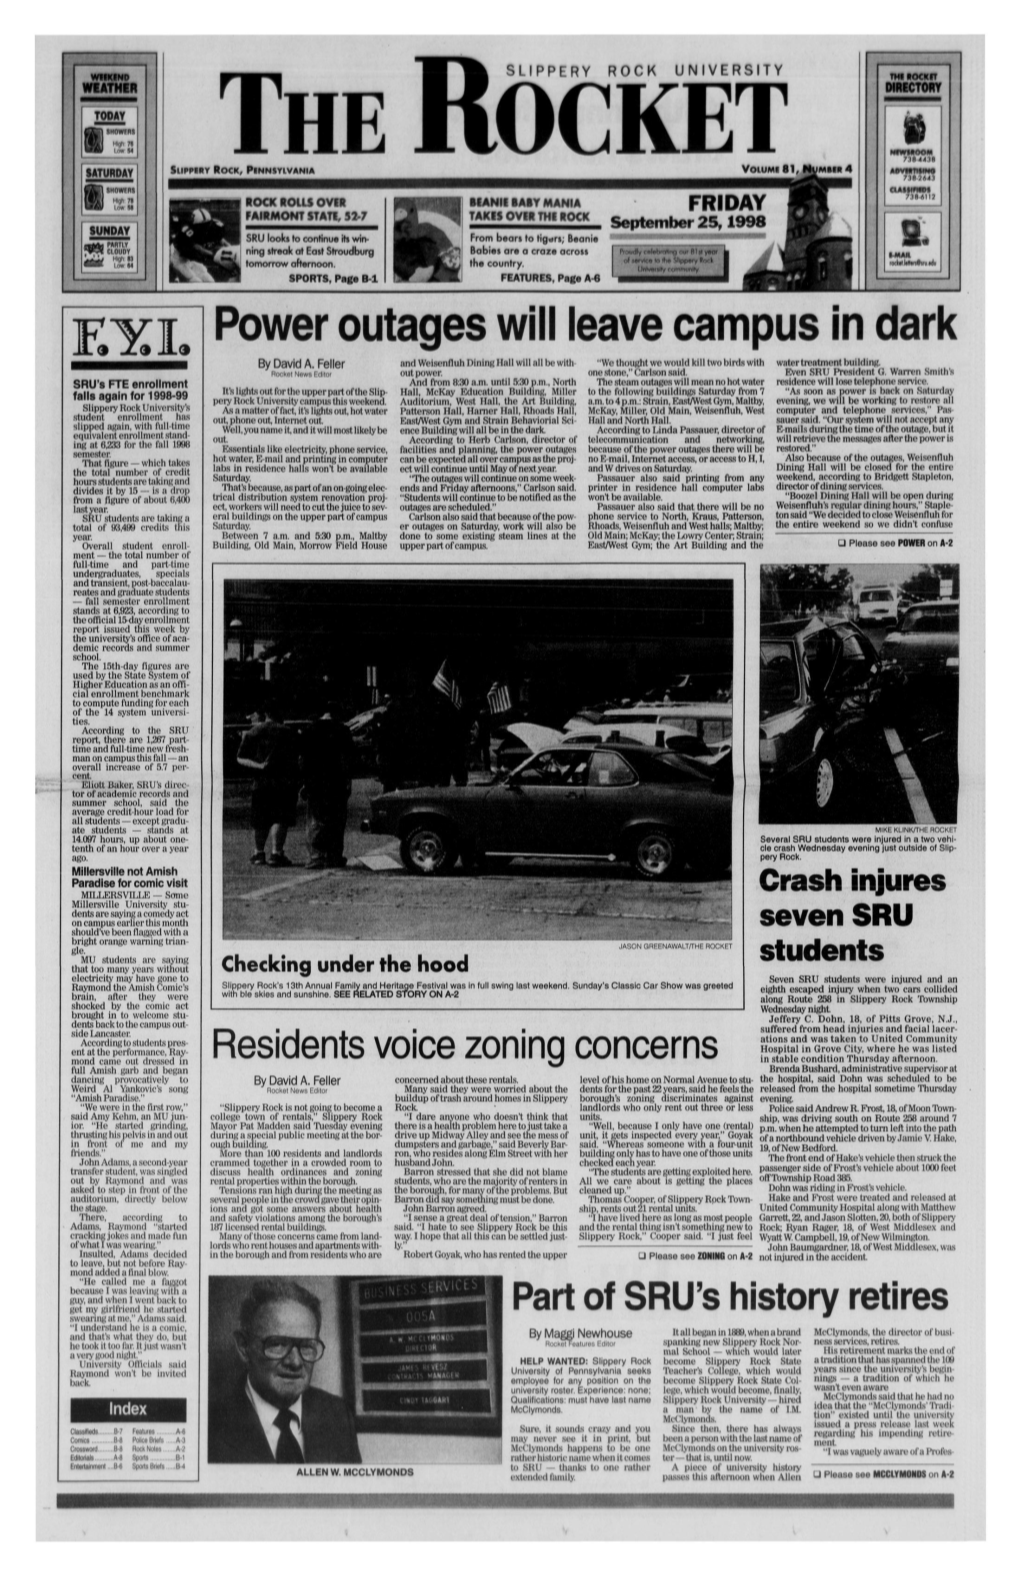 Power Outages Will Leave Campus in Dark by David A